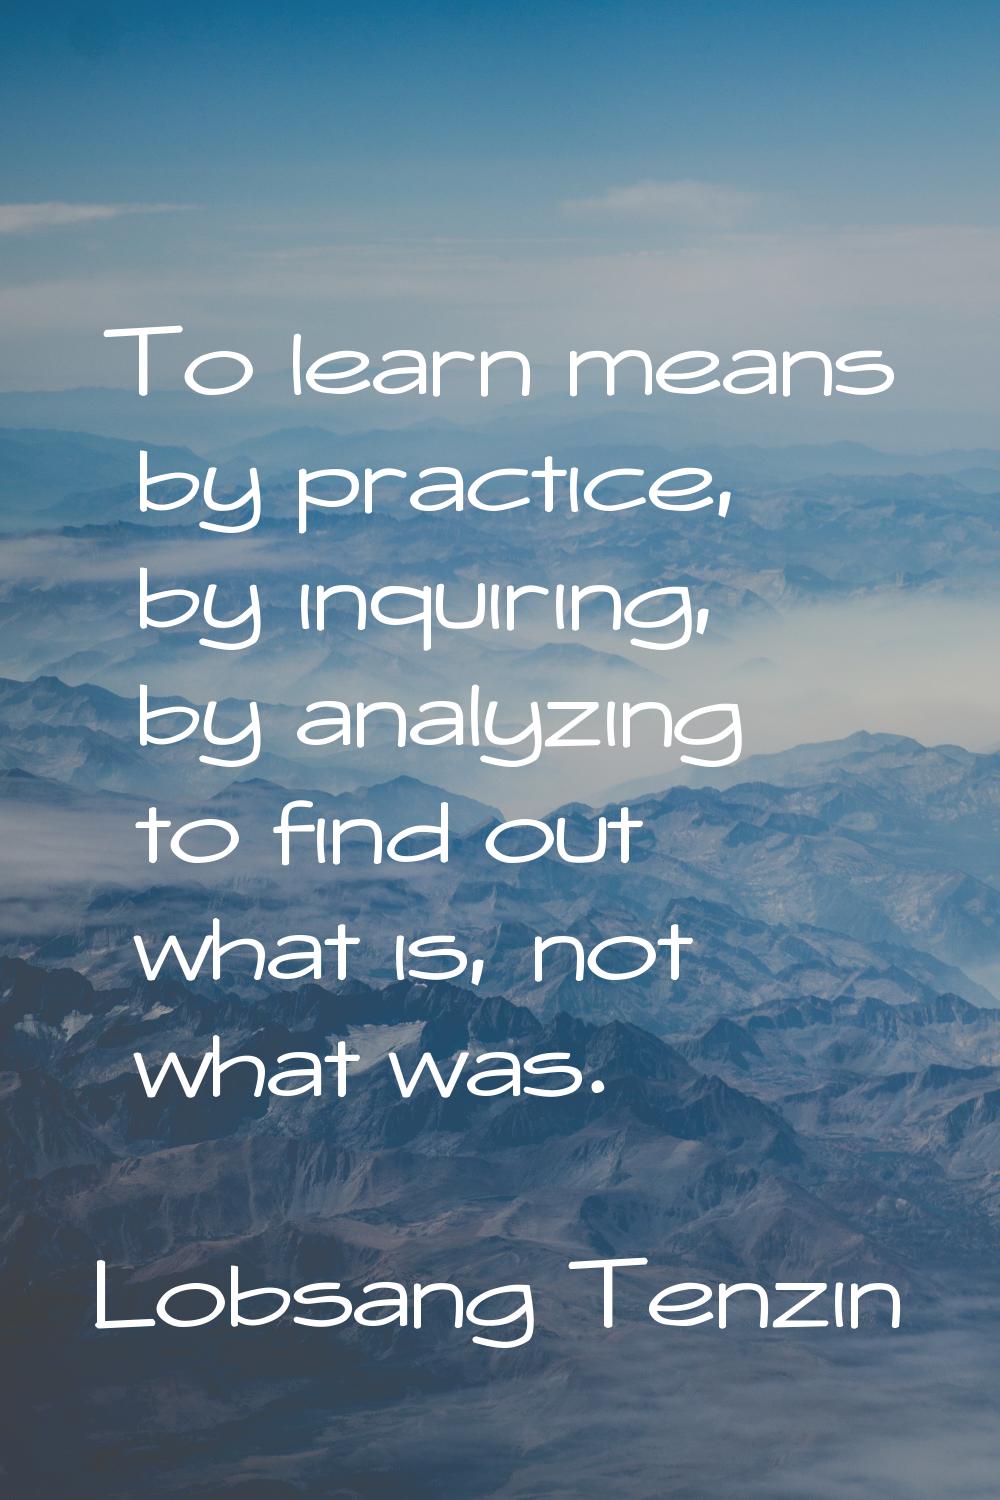 To learn means by practice, by inquiring, by analyzing to find out what is, not what was.